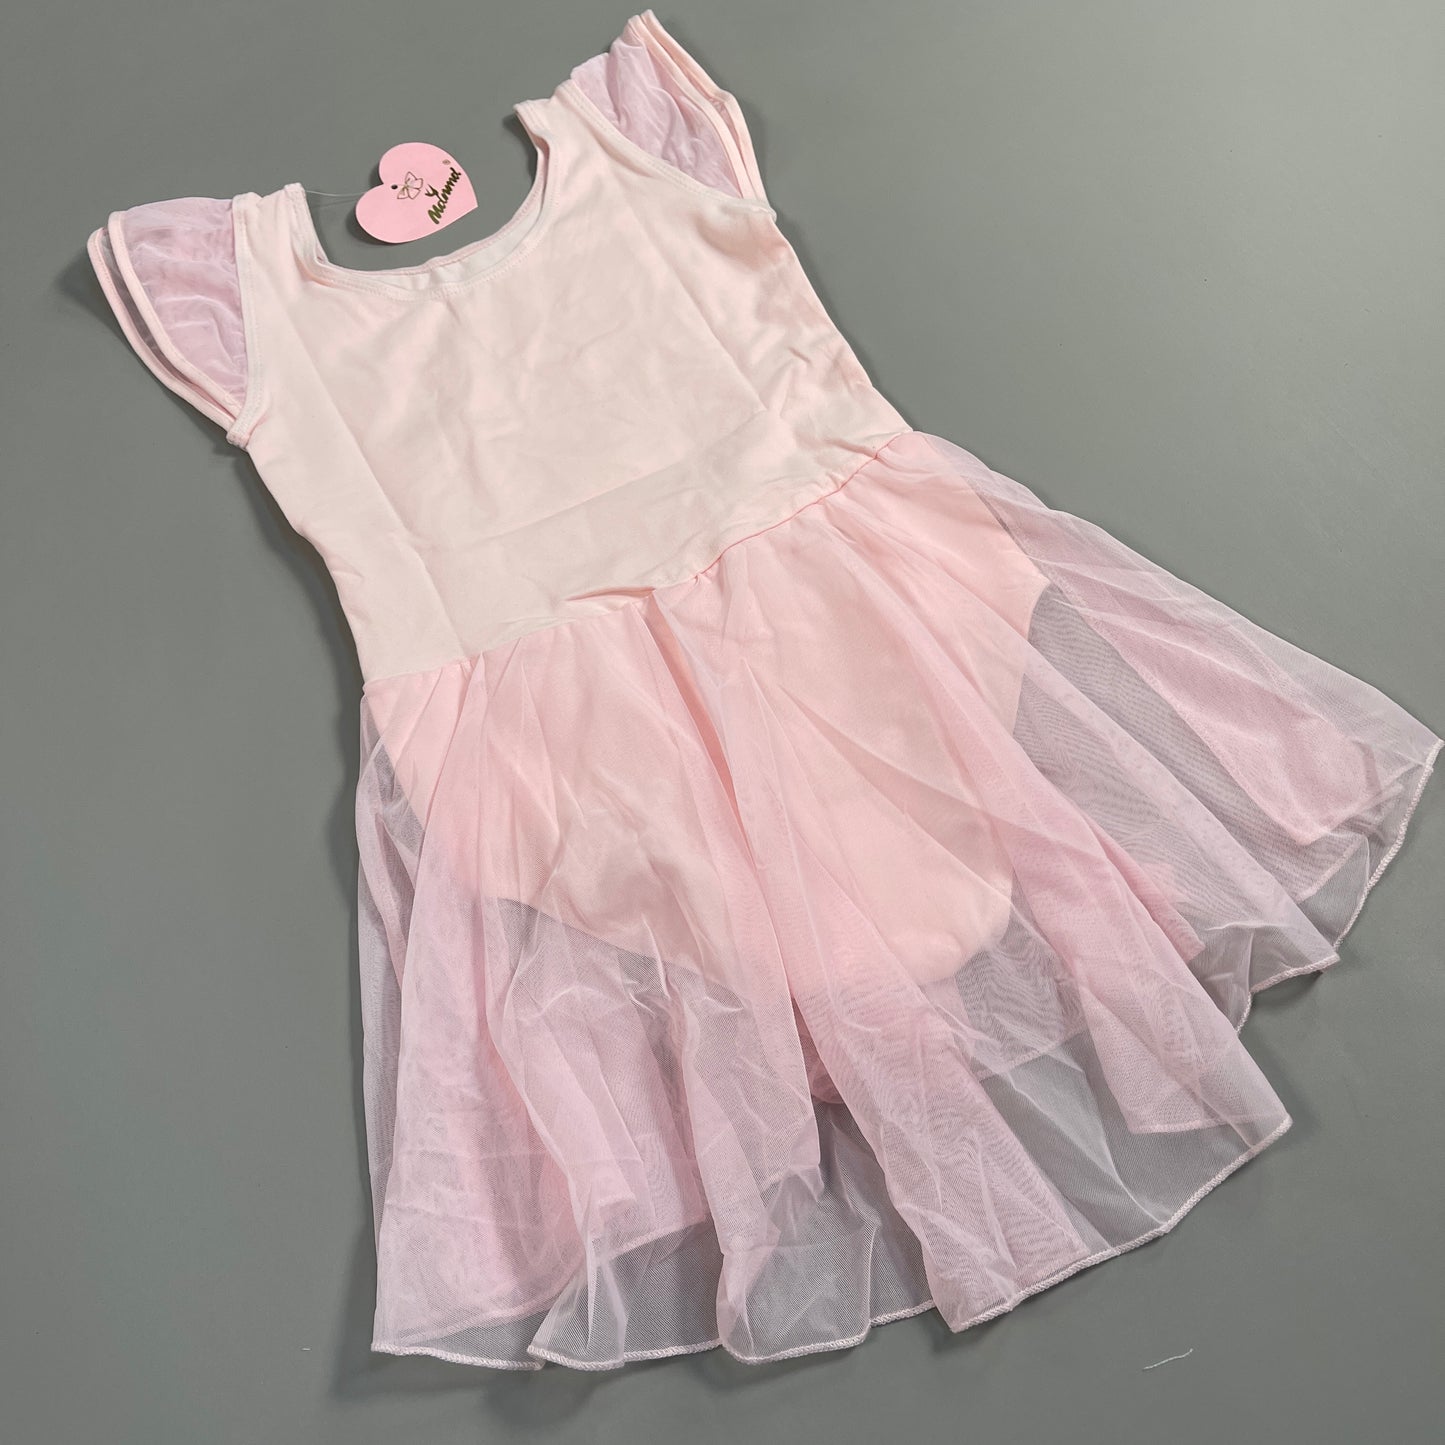 MDNMD Toddler Girls Ballet, Dance, Gymnastic, Leotard Flutter Sleeve Outfit With Skirt Sz 10 Pink (New)